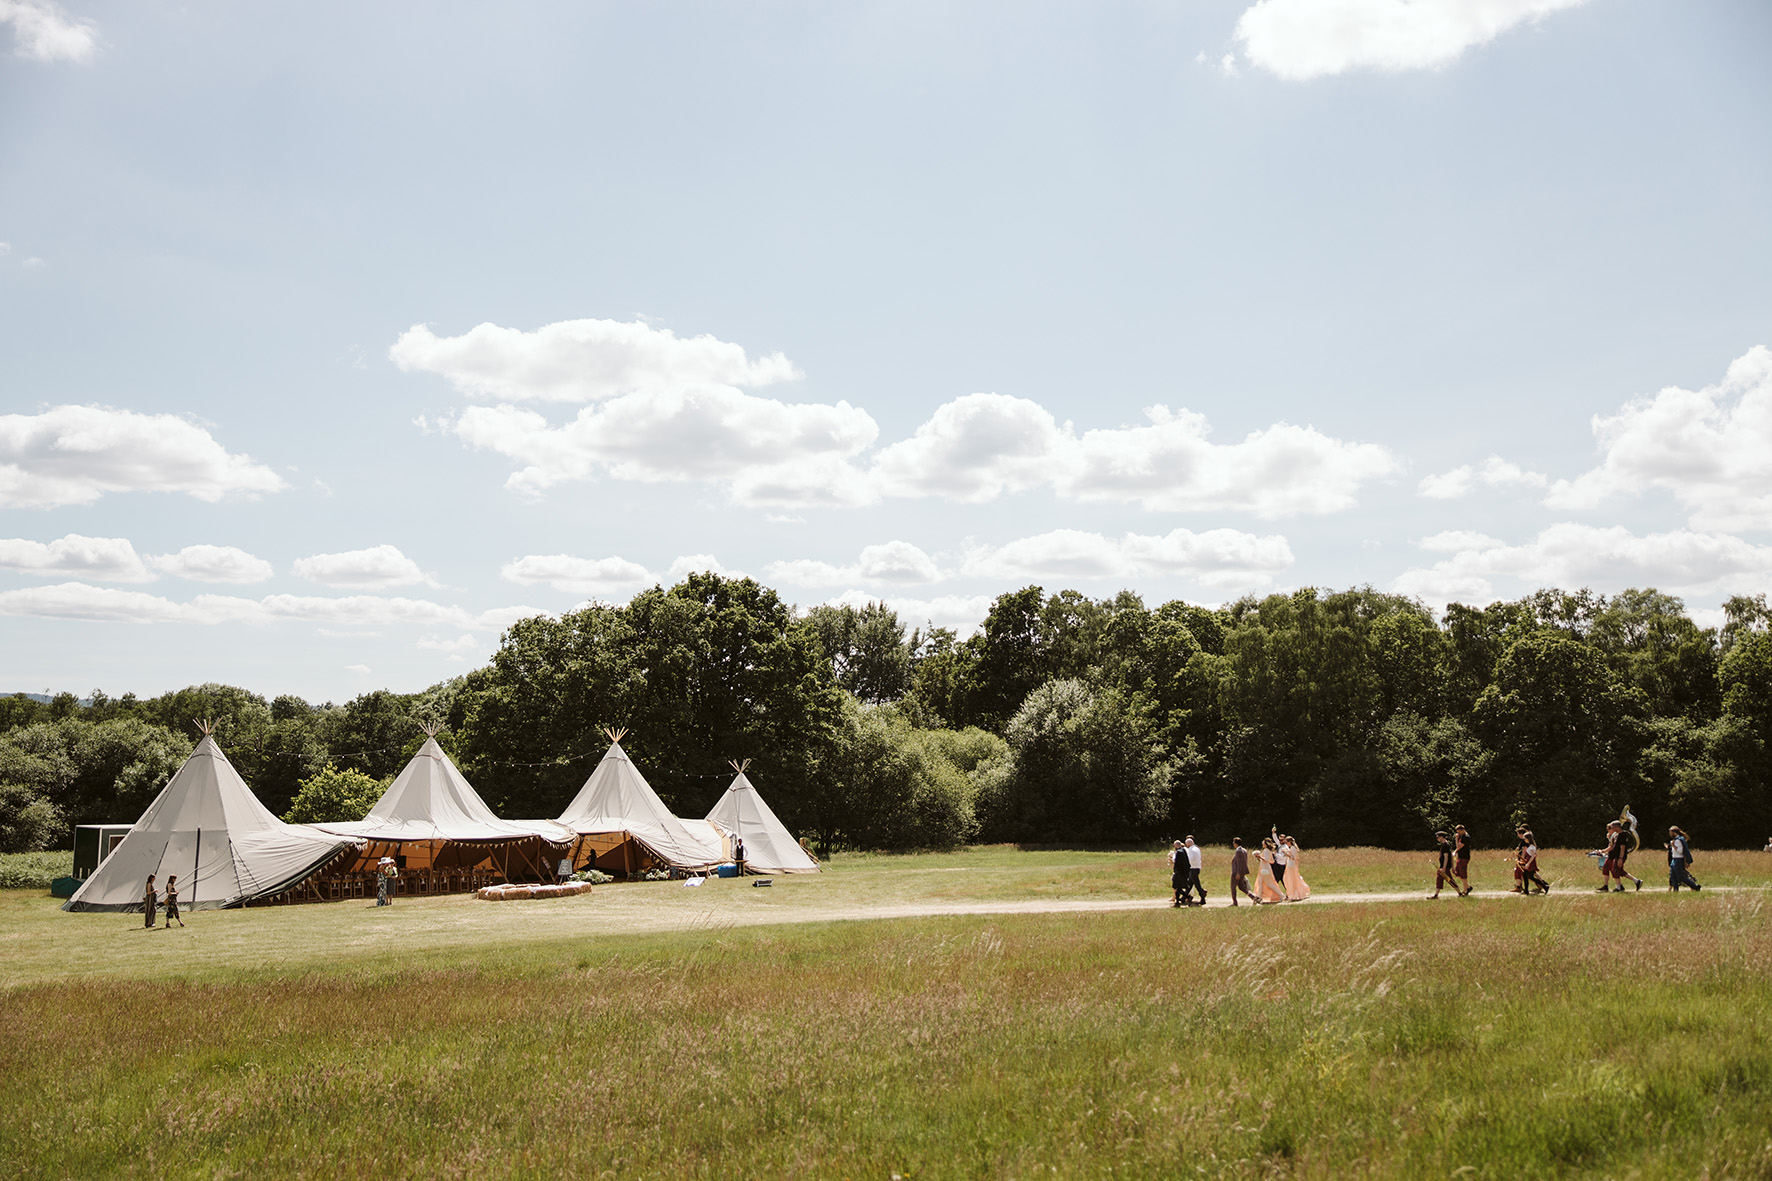 off-white tipis in a field